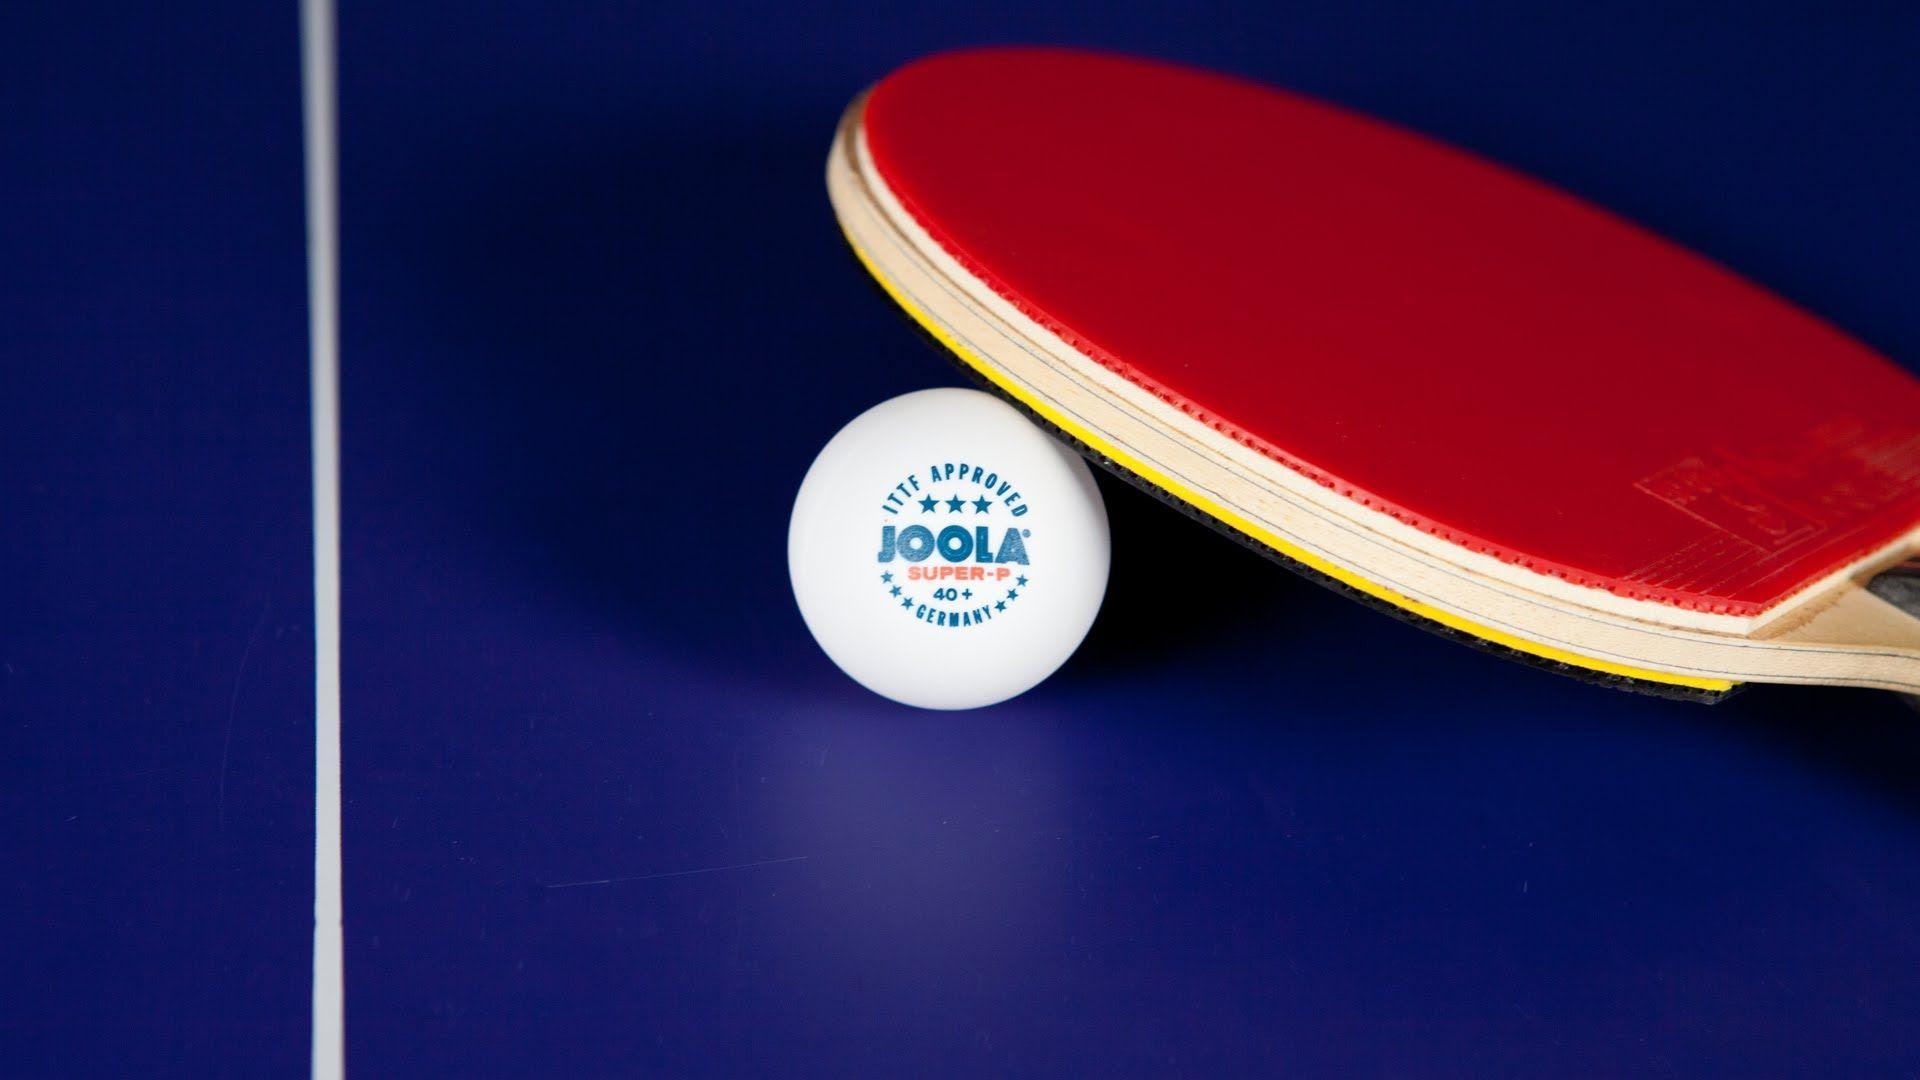 High Resolution Creative Table Tennis Picture